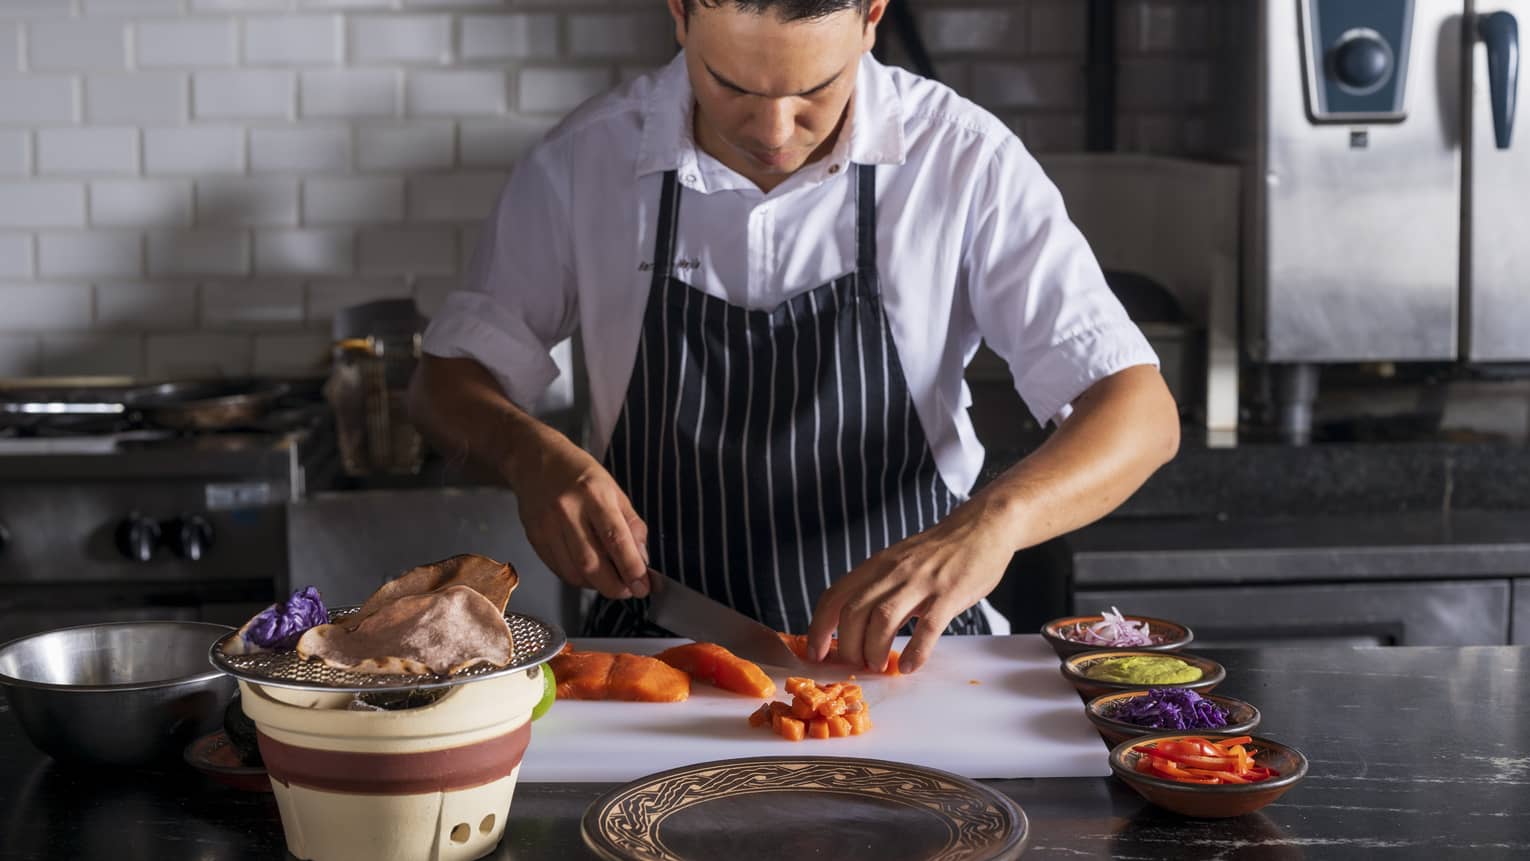 Chef wearing white button-down shirt and a navy-and-white striped apron slices salmon on a white cutting board in an industrial kitchen